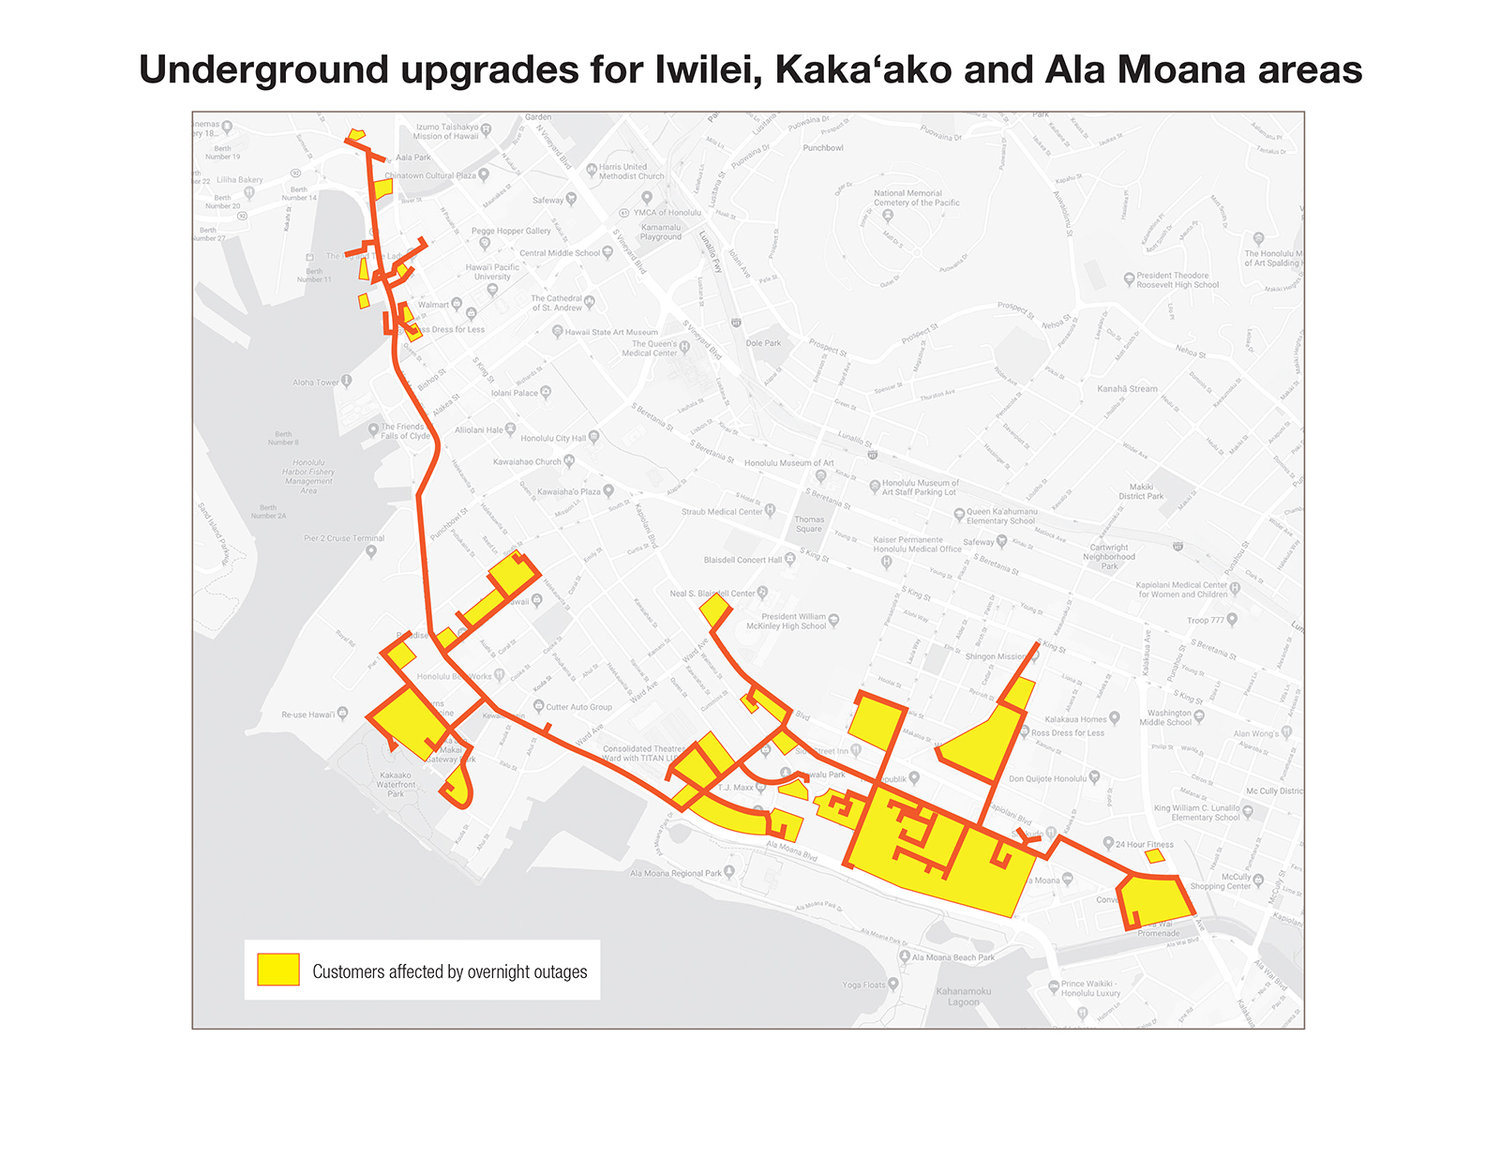 Heco Planned Power Outages In Ala Moana And Kakaako Areas Begin